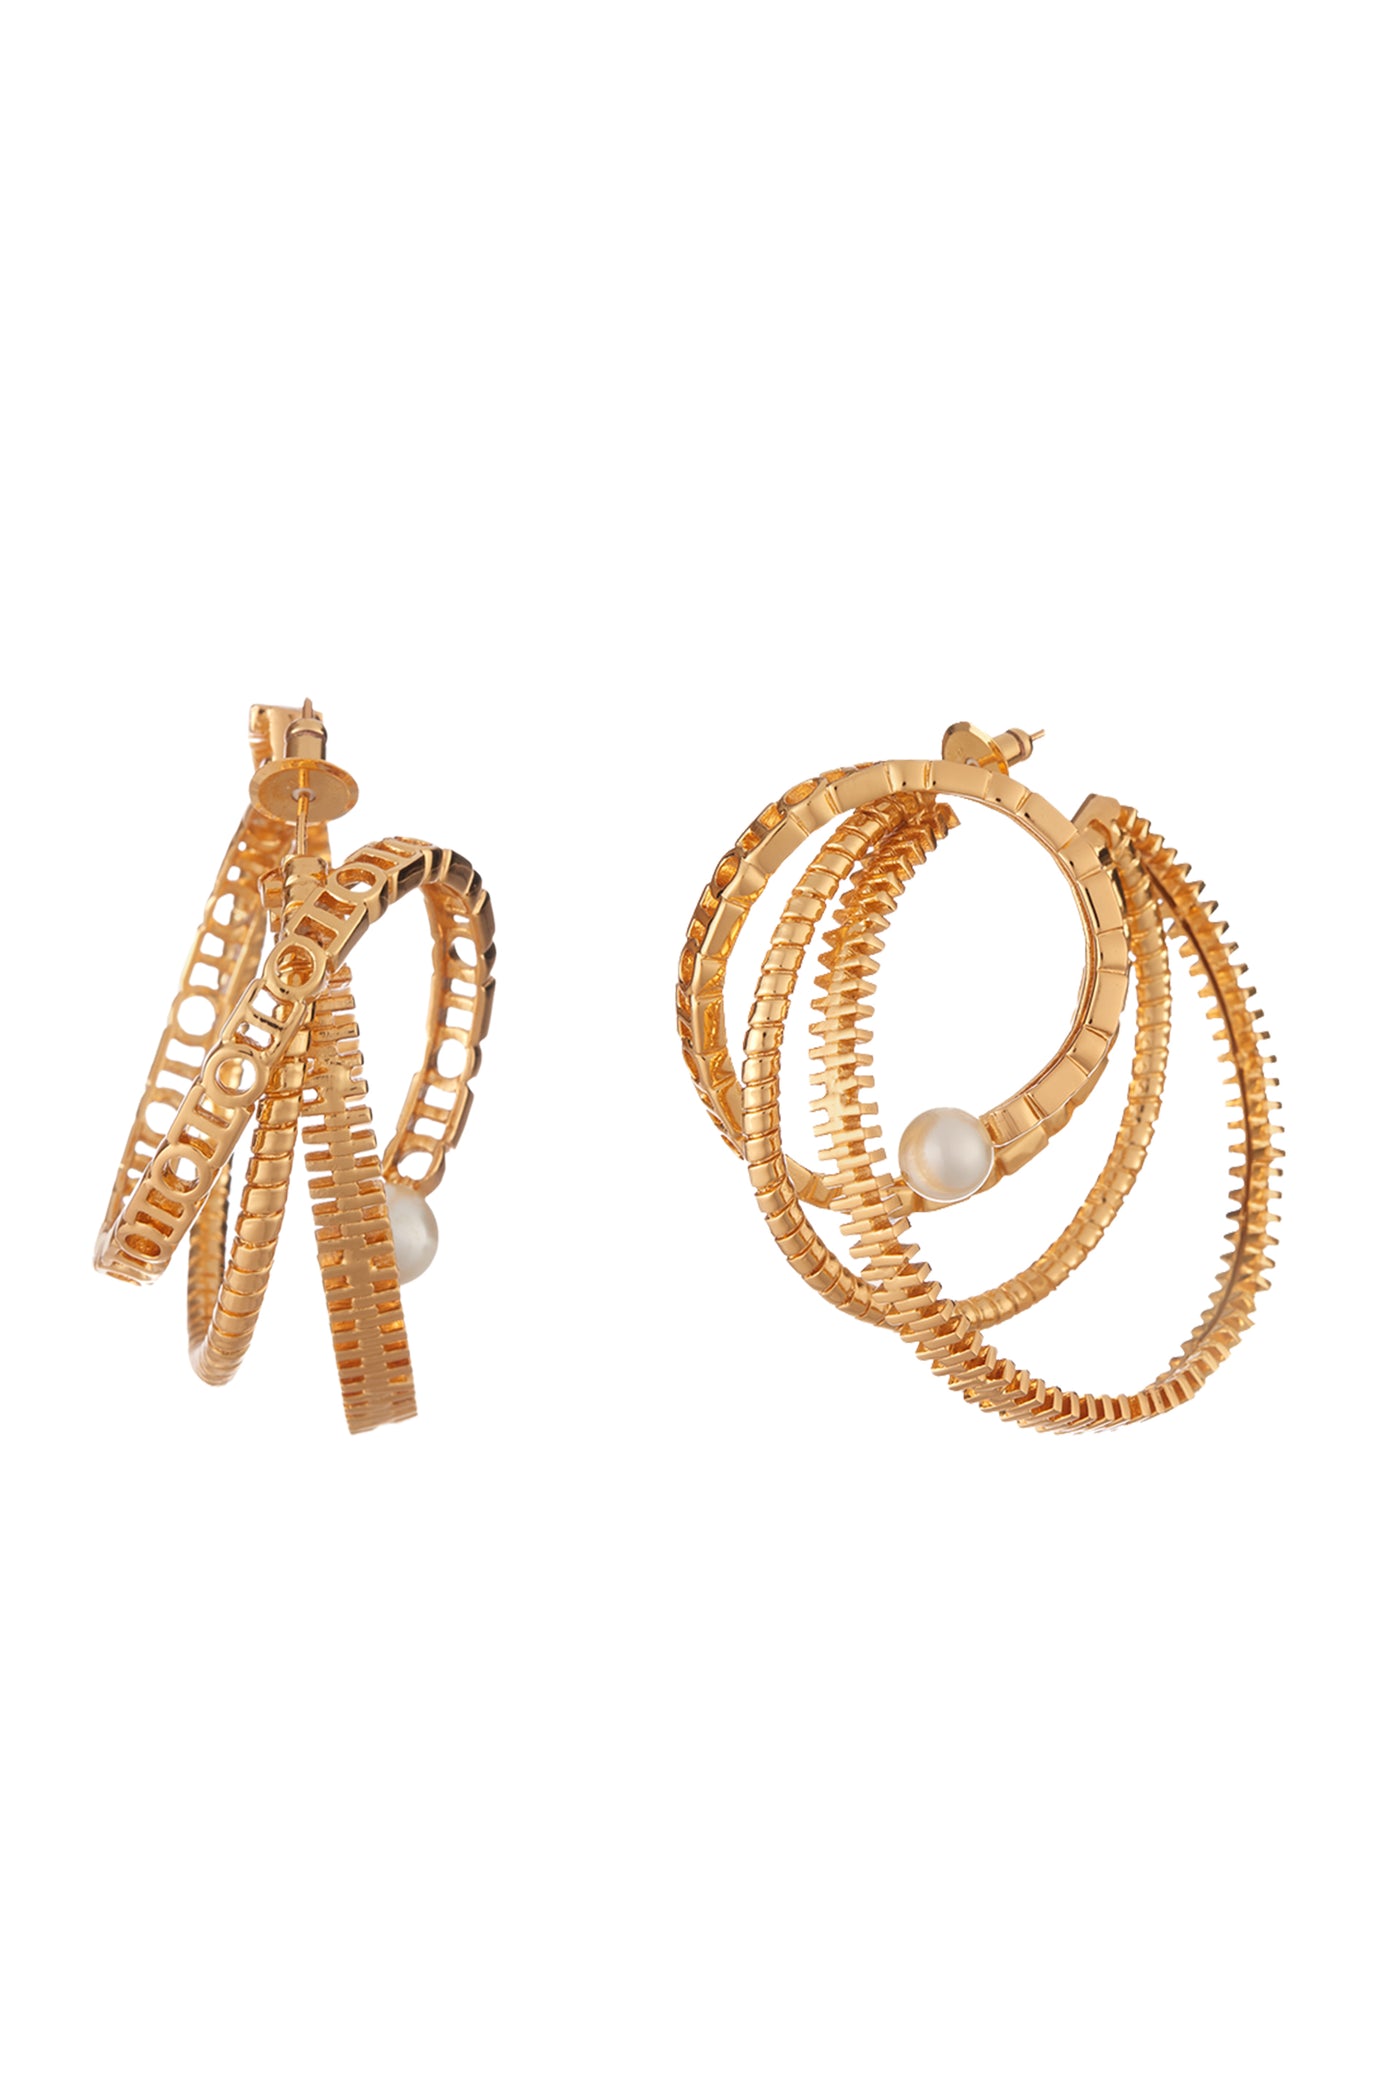 outhouse jewellery Myriad Twisted Pearl Hoops gold earrings online shopping melange singapore fashion designer wear